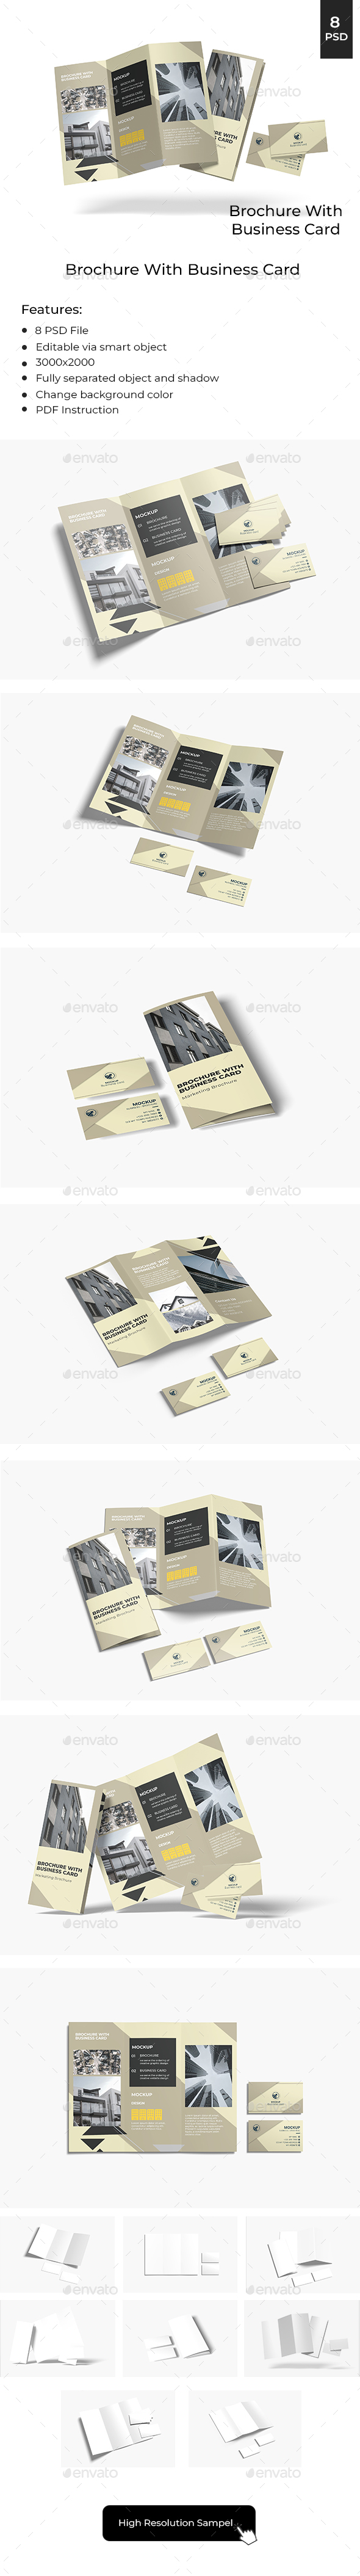 [DOWNLOAD]Brochure With Business Card